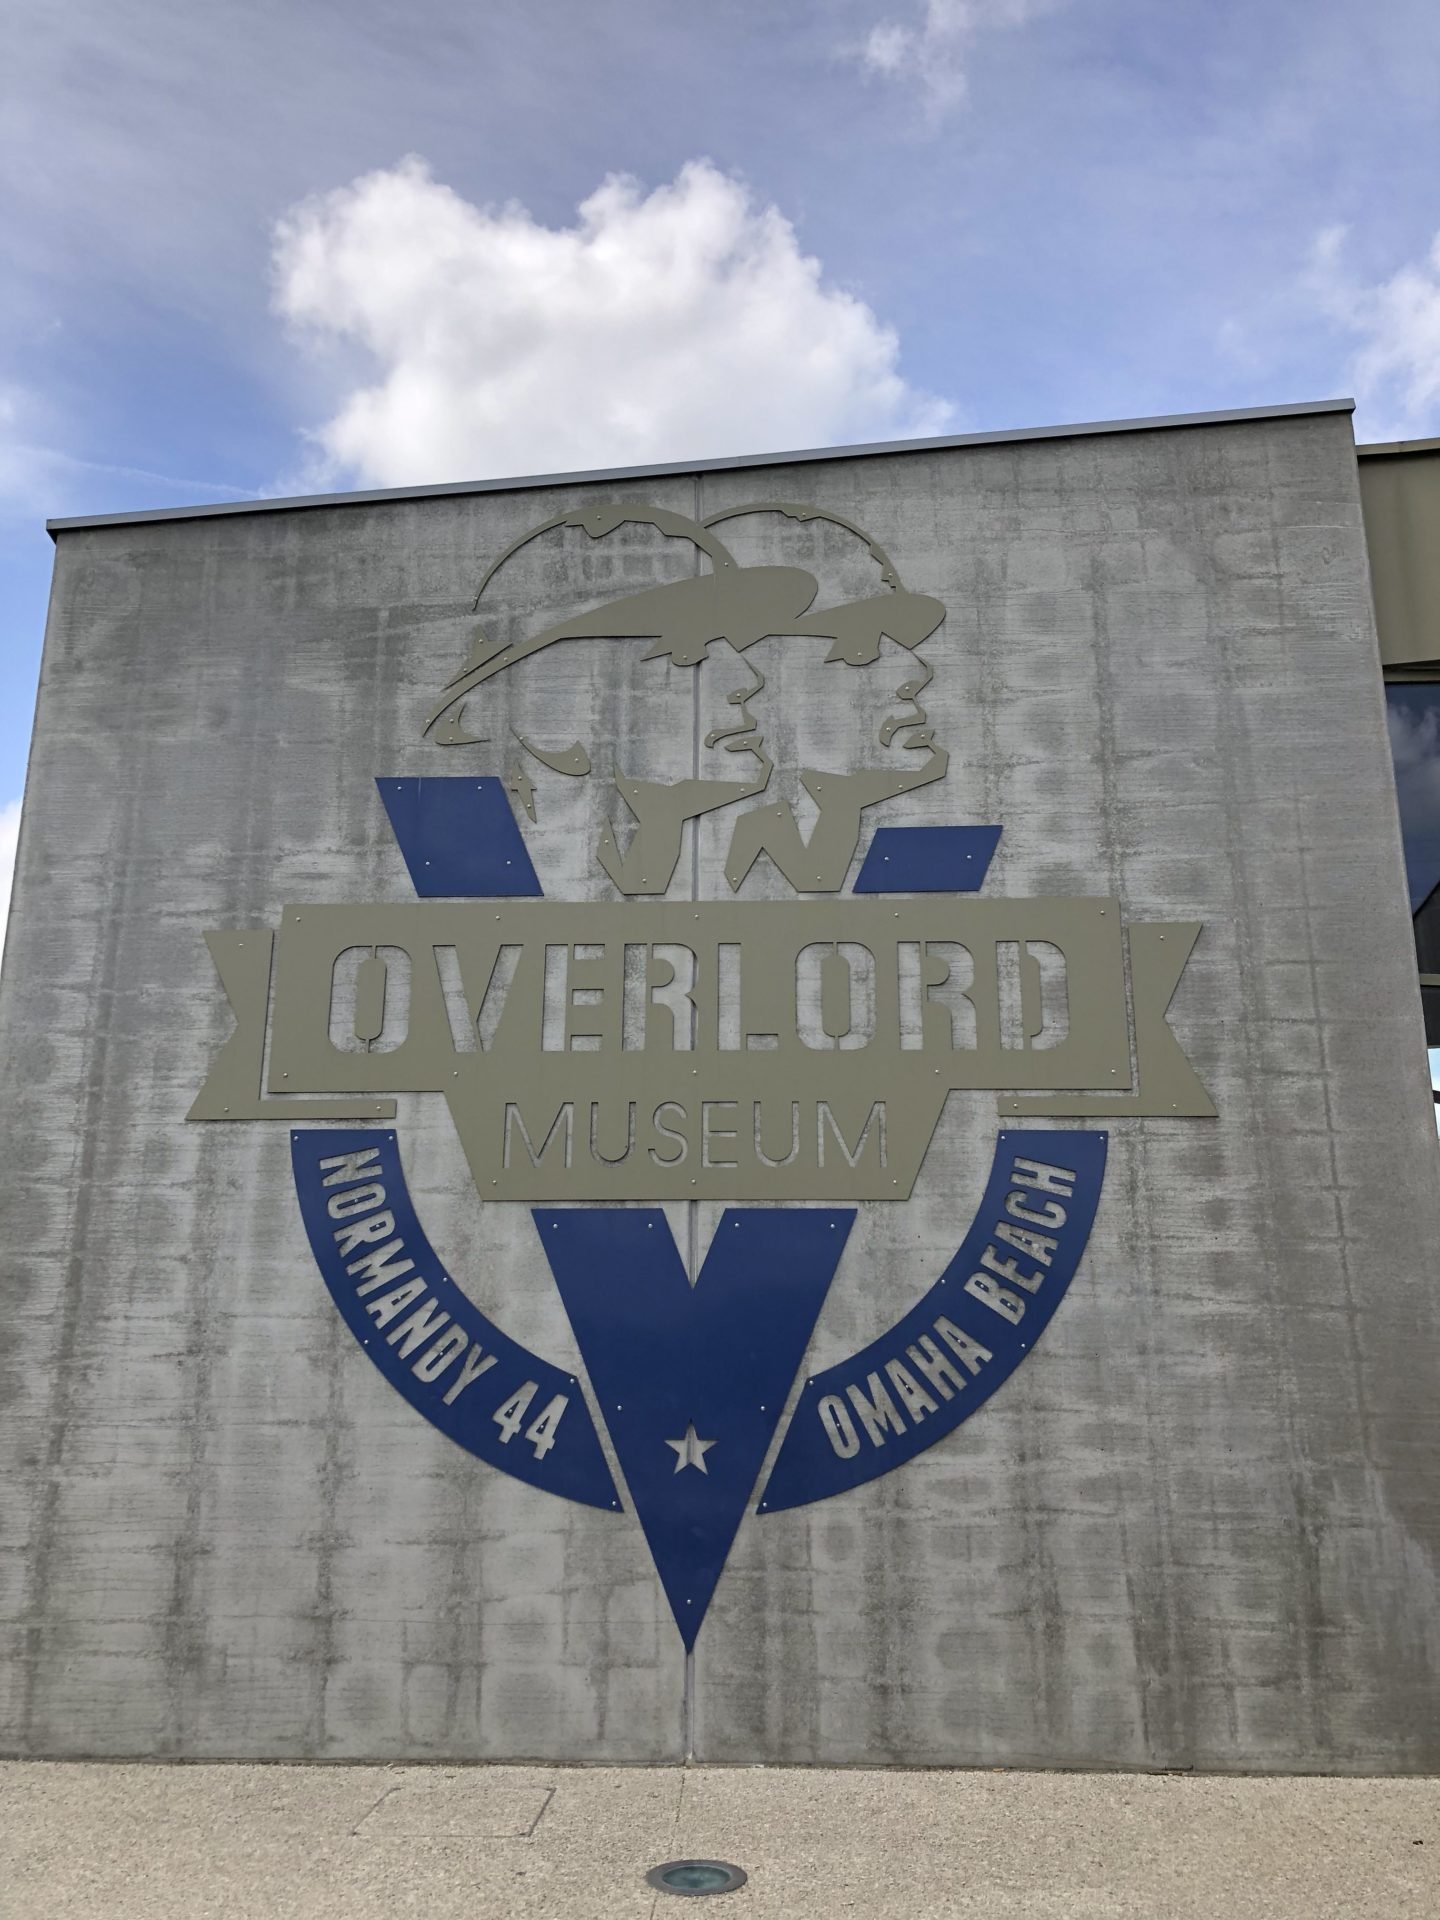 The Overlord museum is directly opposite the site of the Normandy American Cemetery. It contains a large collection of tanks, aircraft and smaller items. The collection of Michel Leloup was largely found on Normandy soil and took around 40 years to collect.